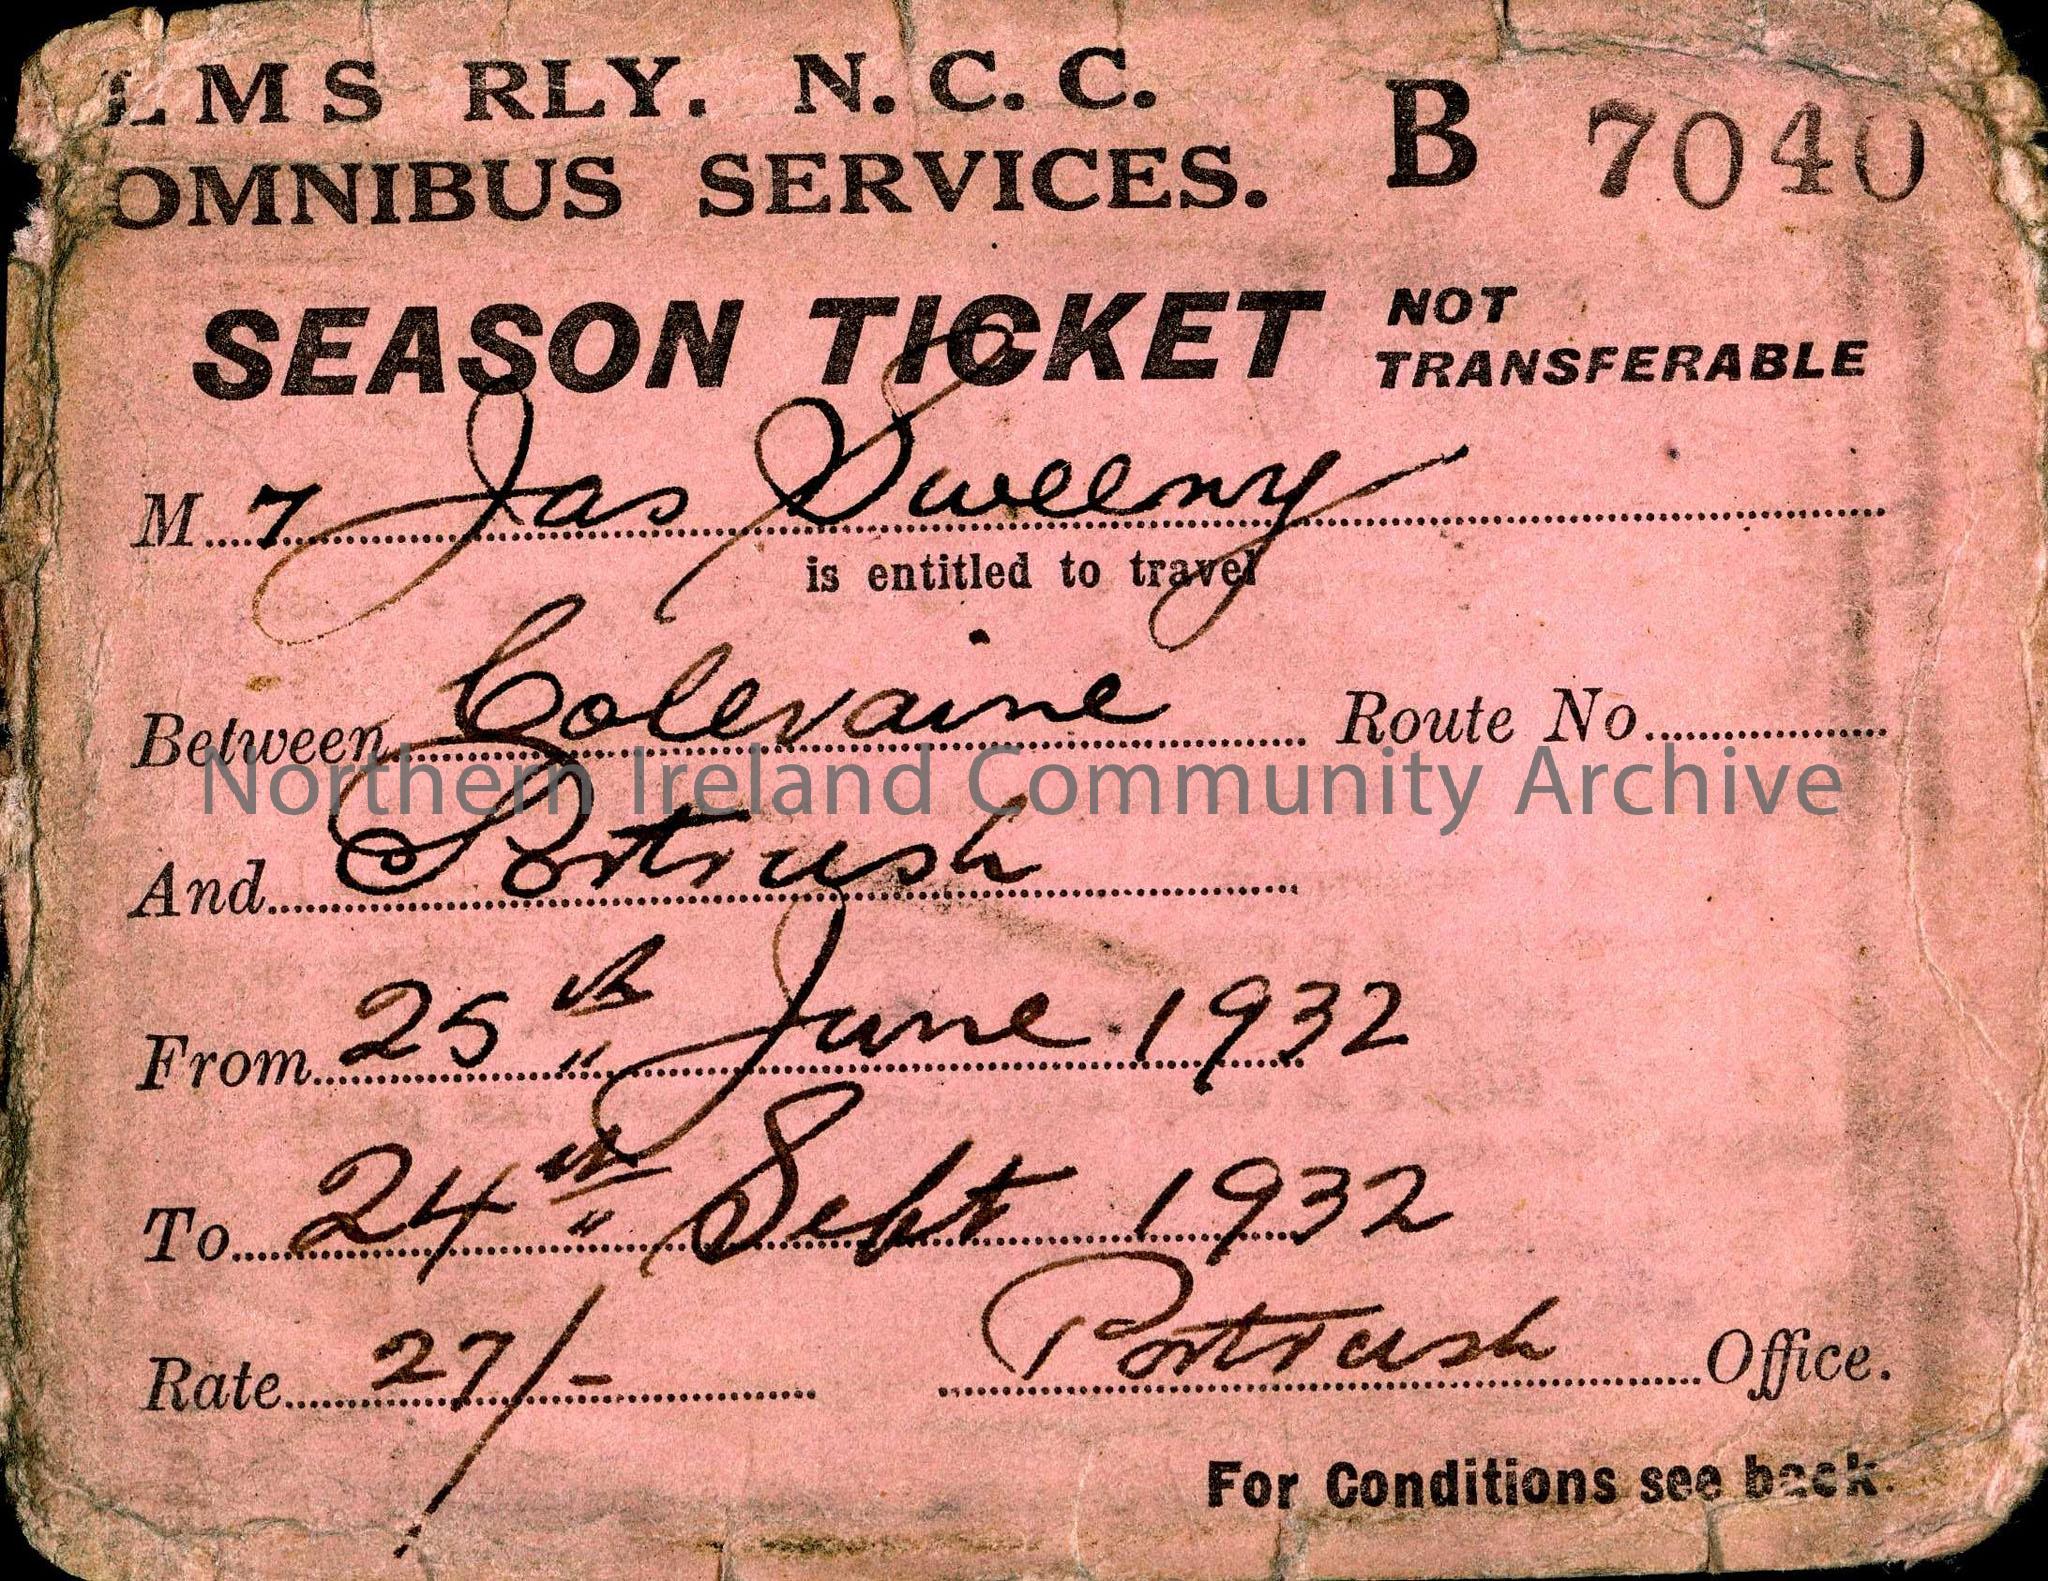 Season ticket for LMS RLY. N.C.C. Omnibus services belonging to Mr Jas Sweeney. For between Coleraine and Portrush. Valid from 25th June 1932 – 24th S…